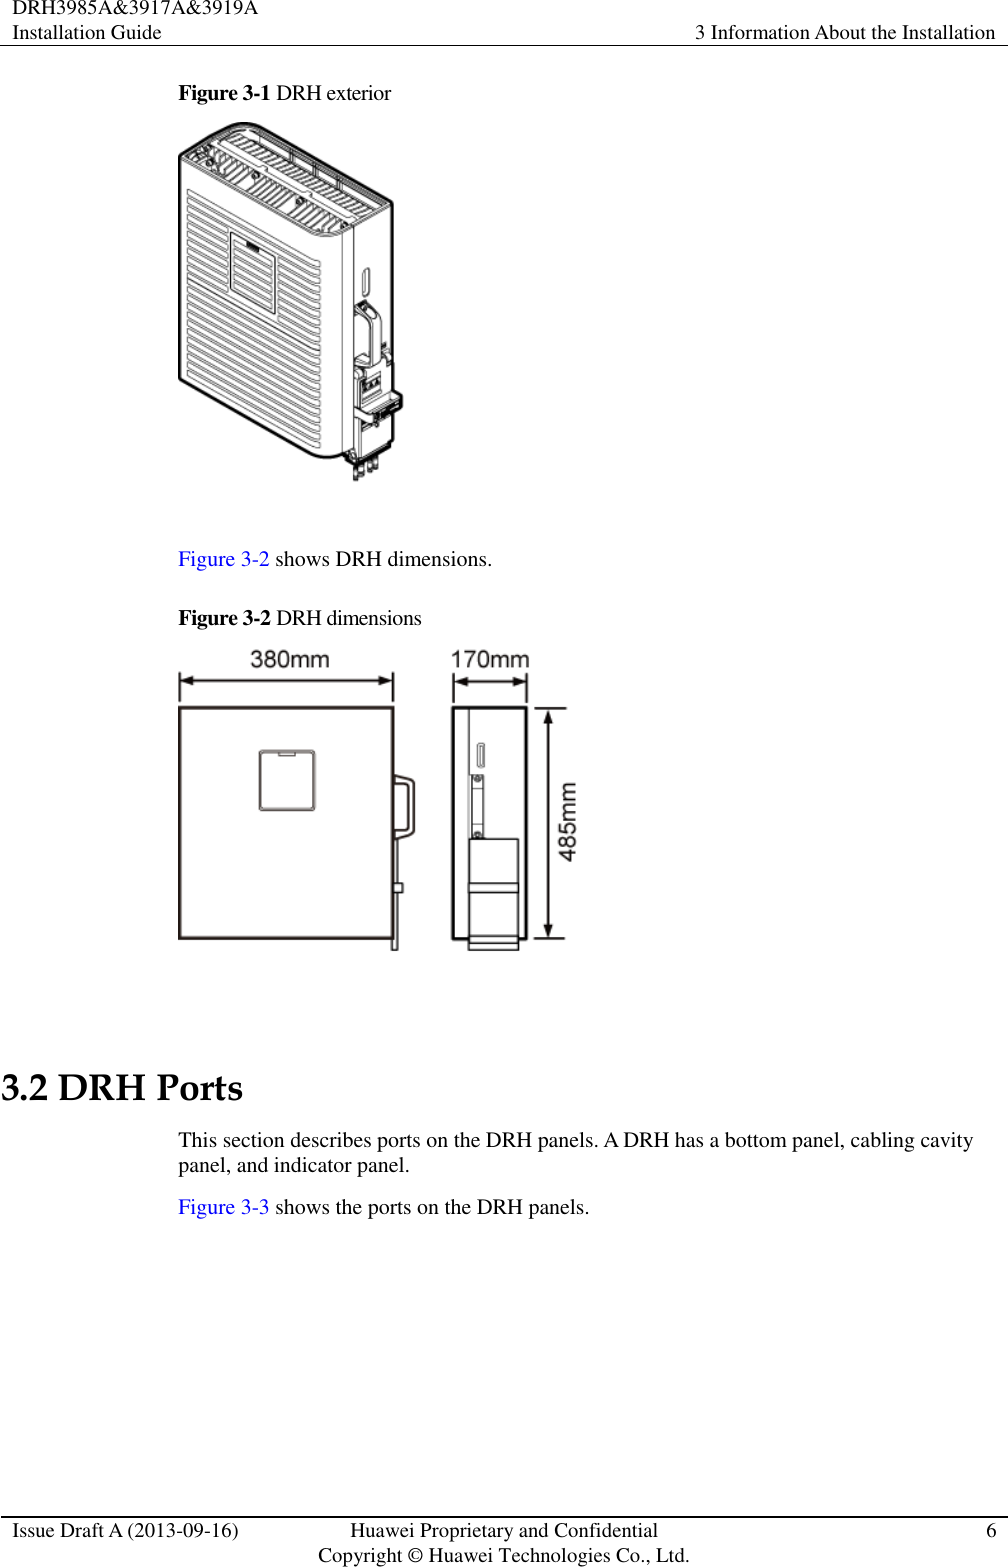 DRH3985A&amp;3917A&amp;3919A Installation Guide 3 Information About the Installation  Issue Draft A (2013-09-16) Huawei Proprietary and Confidential                                     Copyright © Huawei Technologies Co., Ltd. 6  Figure 3-1 DRH exterior   Figure 3-2 shows DRH dimensions. Figure 3-2  DRH dimensions   3.2 DRH Ports This section describes ports on the DRH panels. A DRH has a bottom panel, cabling cavity panel, and indicator panel. Figure 3-3 shows the ports on the DRH panels. 